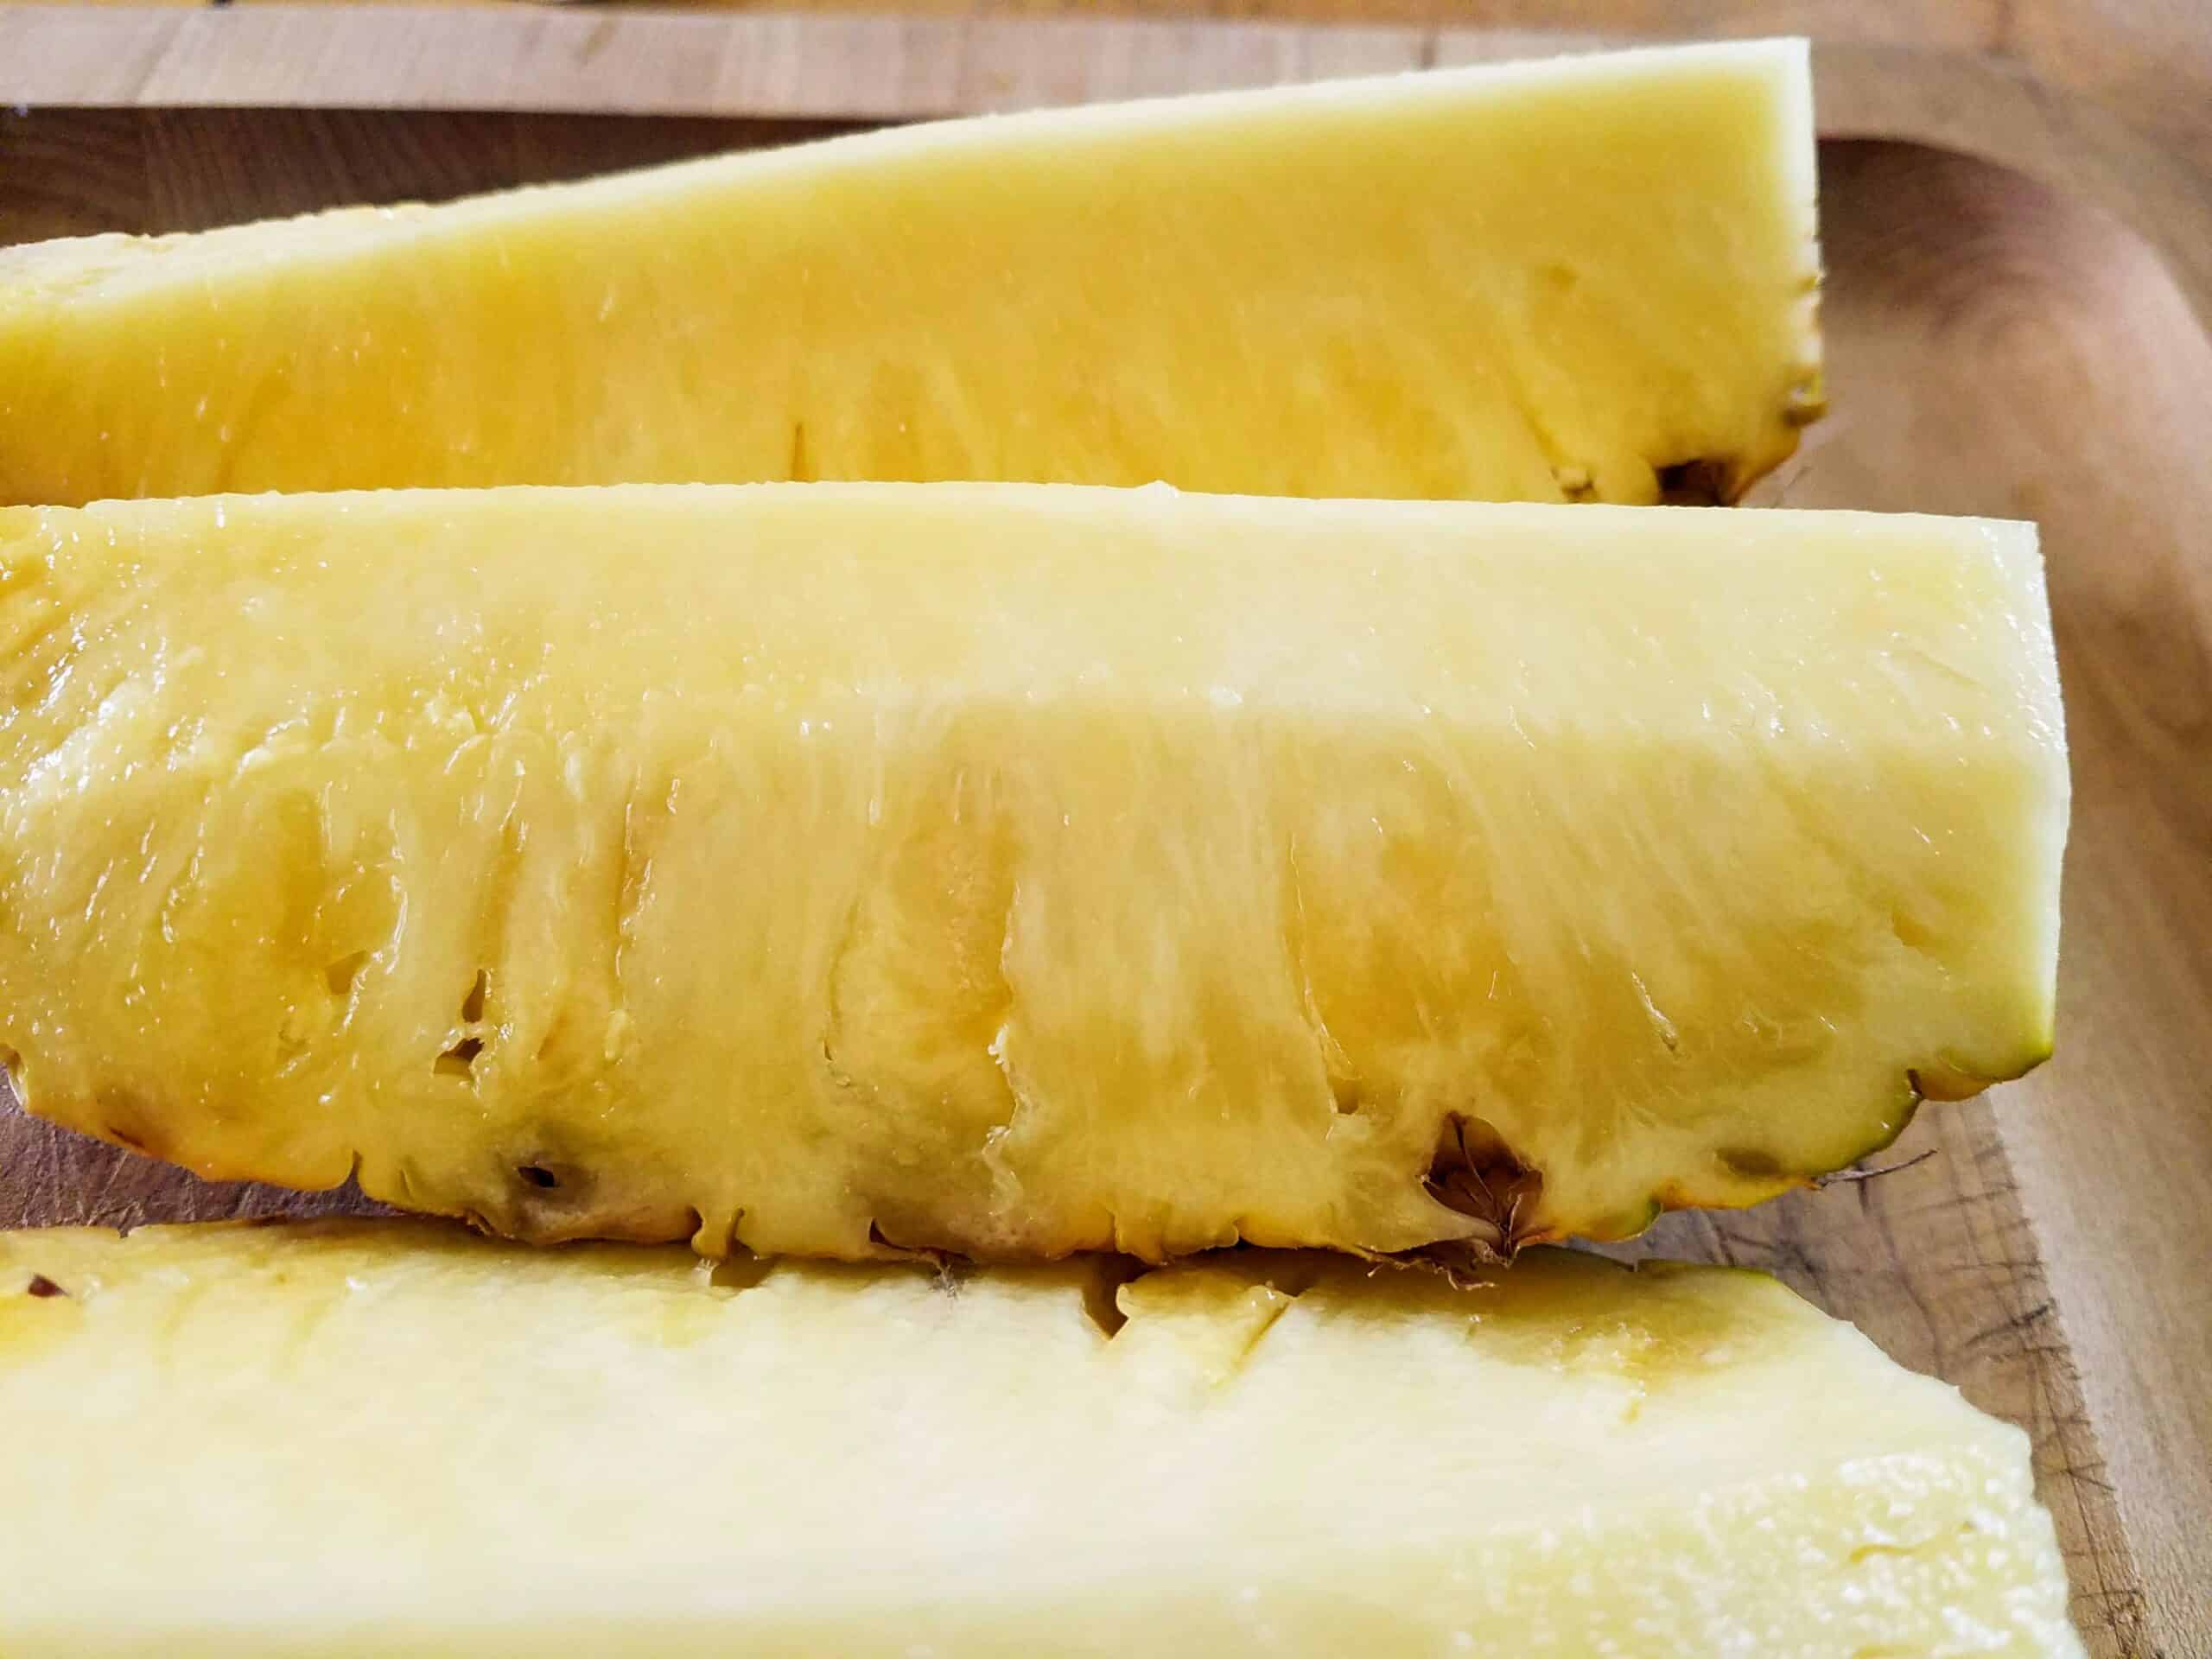 Pineapple ready to be peeled cut into spears